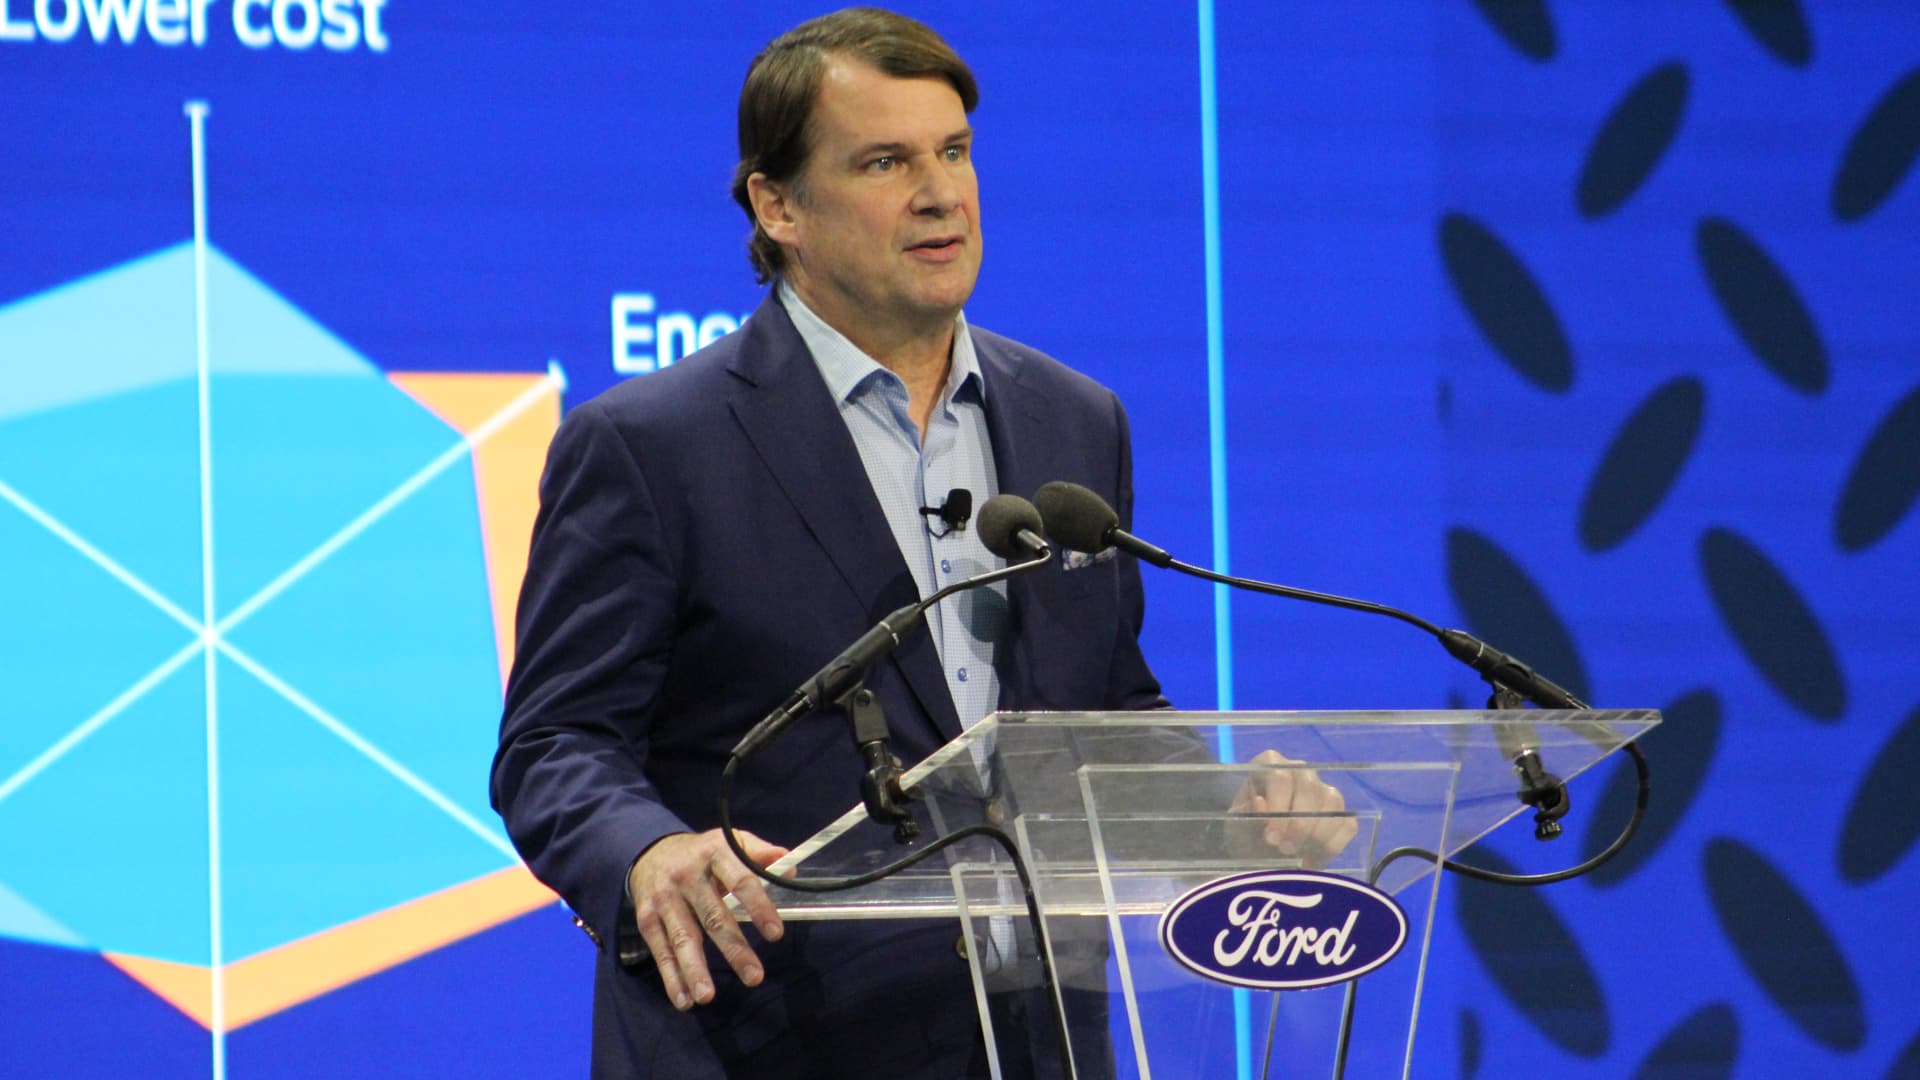 Ford CEO Jim Farley at a battery lab for the automaker in suburban Detroit, announcing a new $3.5 billion electric vehicle battery plant in the state to produce lithium iron phosphate batteries, Feb. 13, 2023.